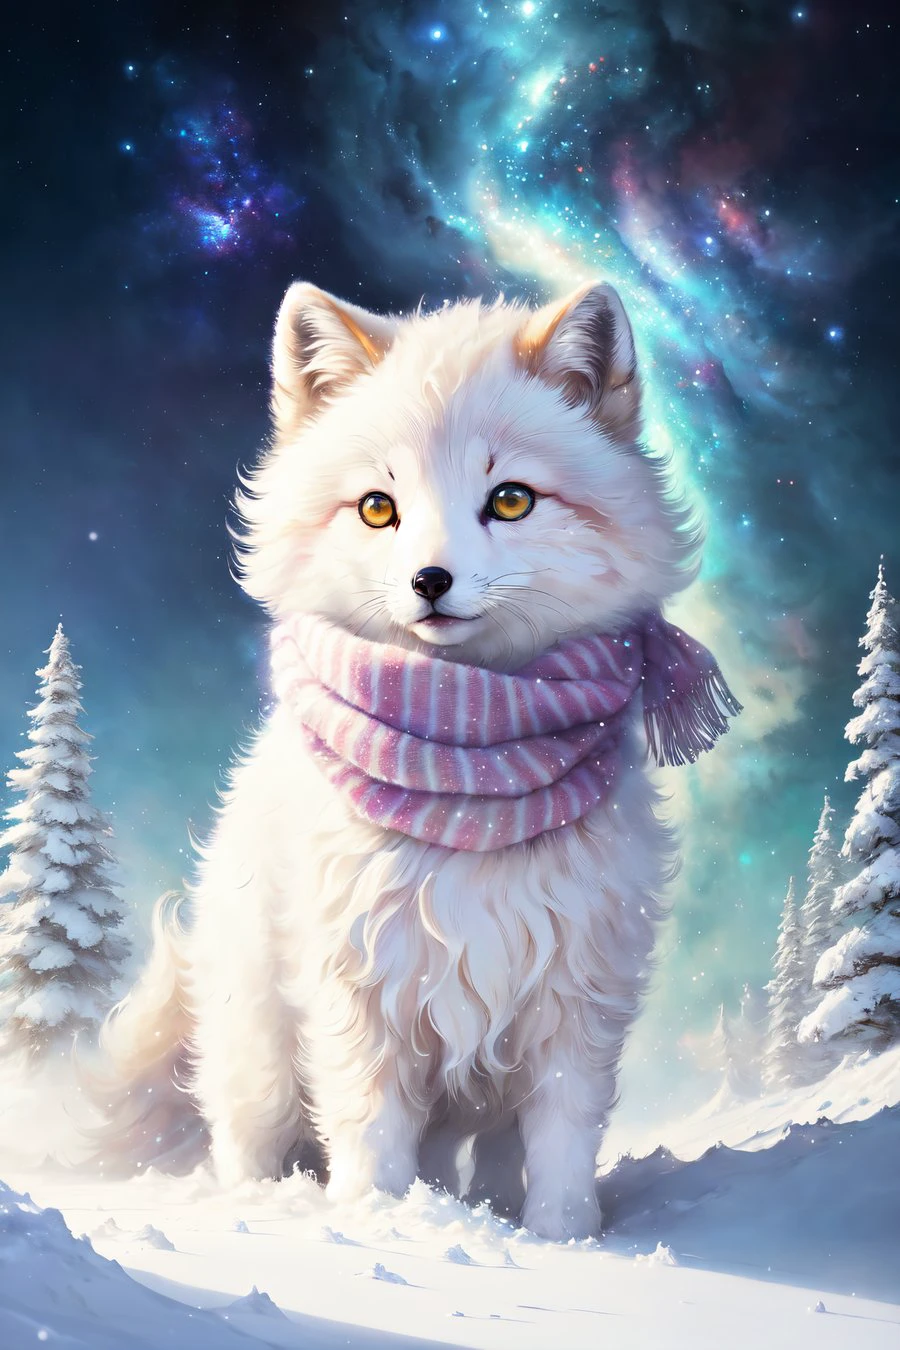 Style-NebMagic, Portrait of a round fluffy cute baby arctic fox with a scarf made of Style-SylvaMagic  in the snow, by Ismail Inceoglu, Gazelli, james jean, Anton Fadeev and Yoshitaka Amano, insanely detailed, 8k resolution, digital art, trending on artstation, Vibrant Colours, chibi style, a masterpiece, adorable friendly lovely